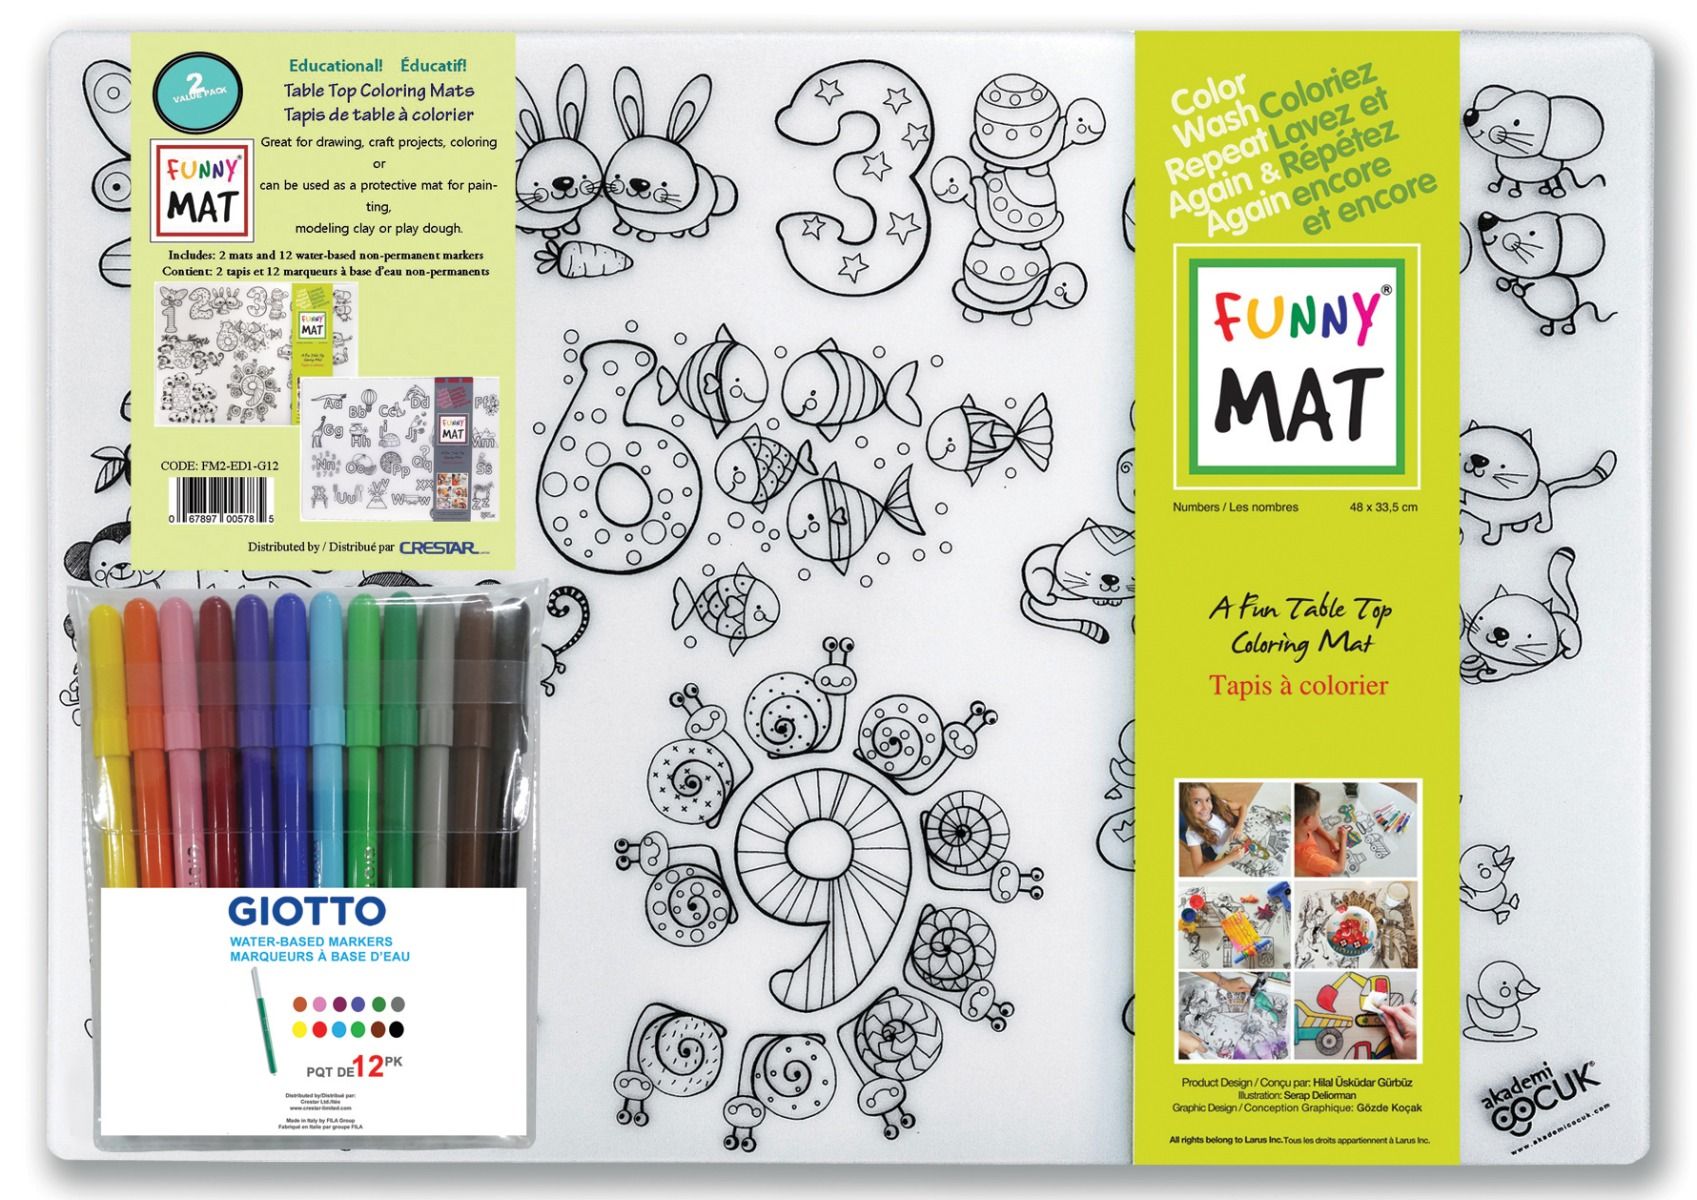 FUNNY MAT table top coloring mats - Alphabets & Numbers - Blesket Canada